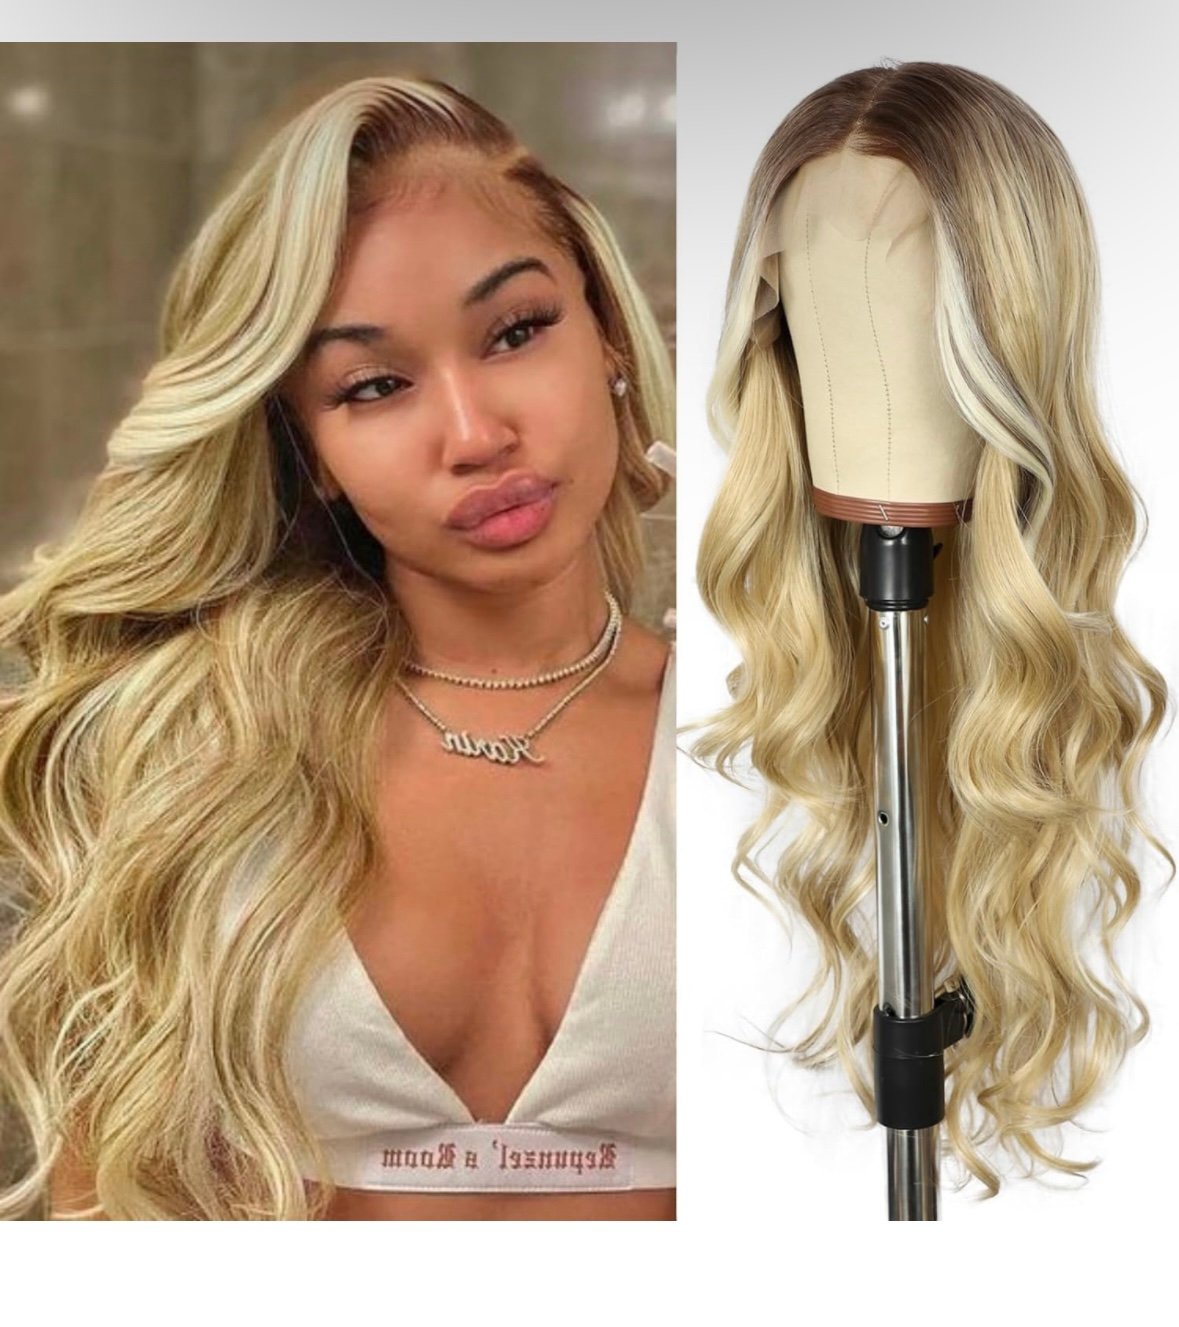 SAPPHIREWIGS Long Blonde Wavy Wig for Women Curly Wavy 13x4 Lace Front Wig 6lBeyluoA